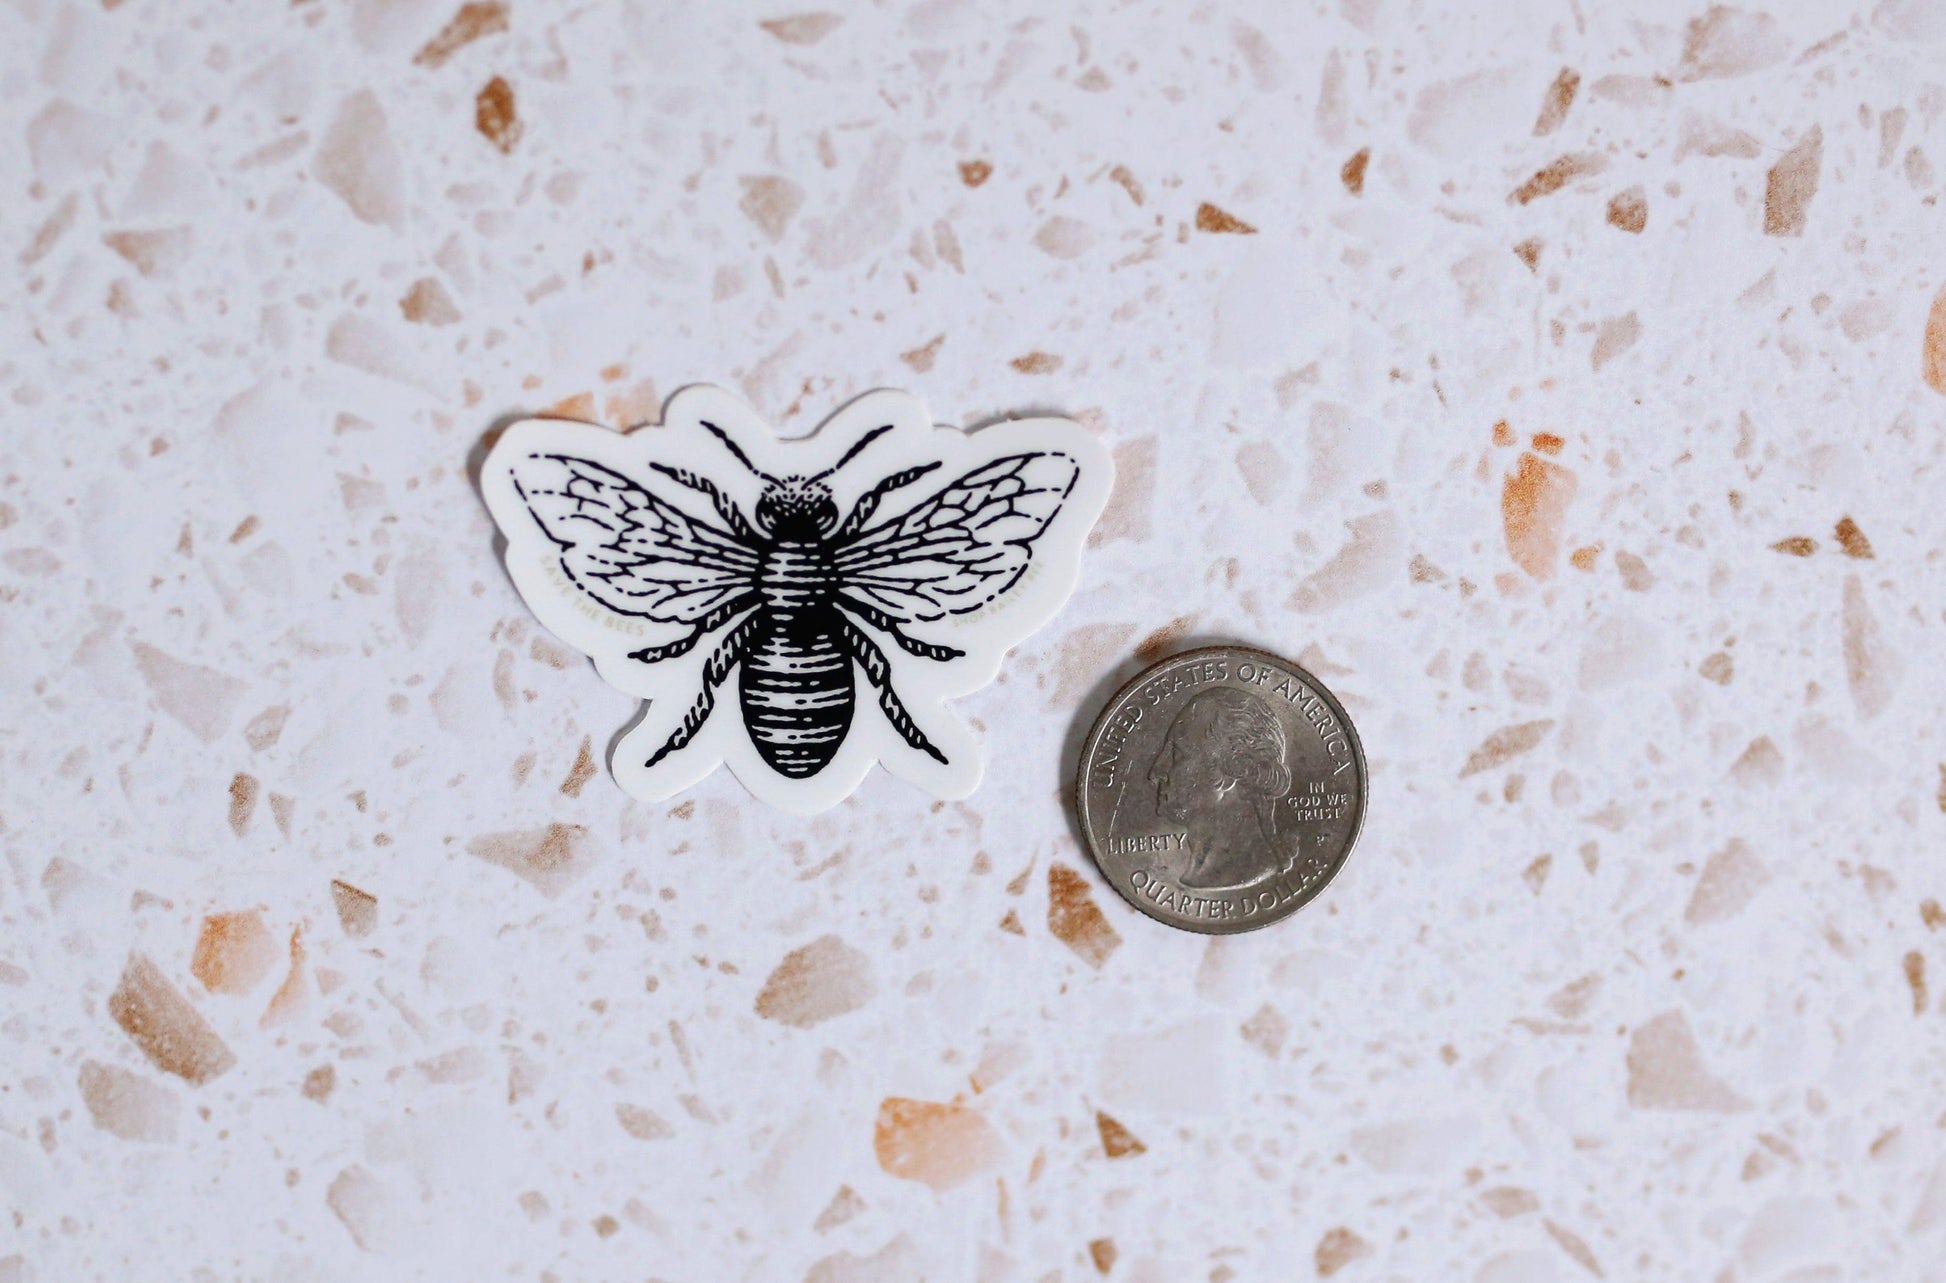 save the bees sticker next to a quarter for size comparison